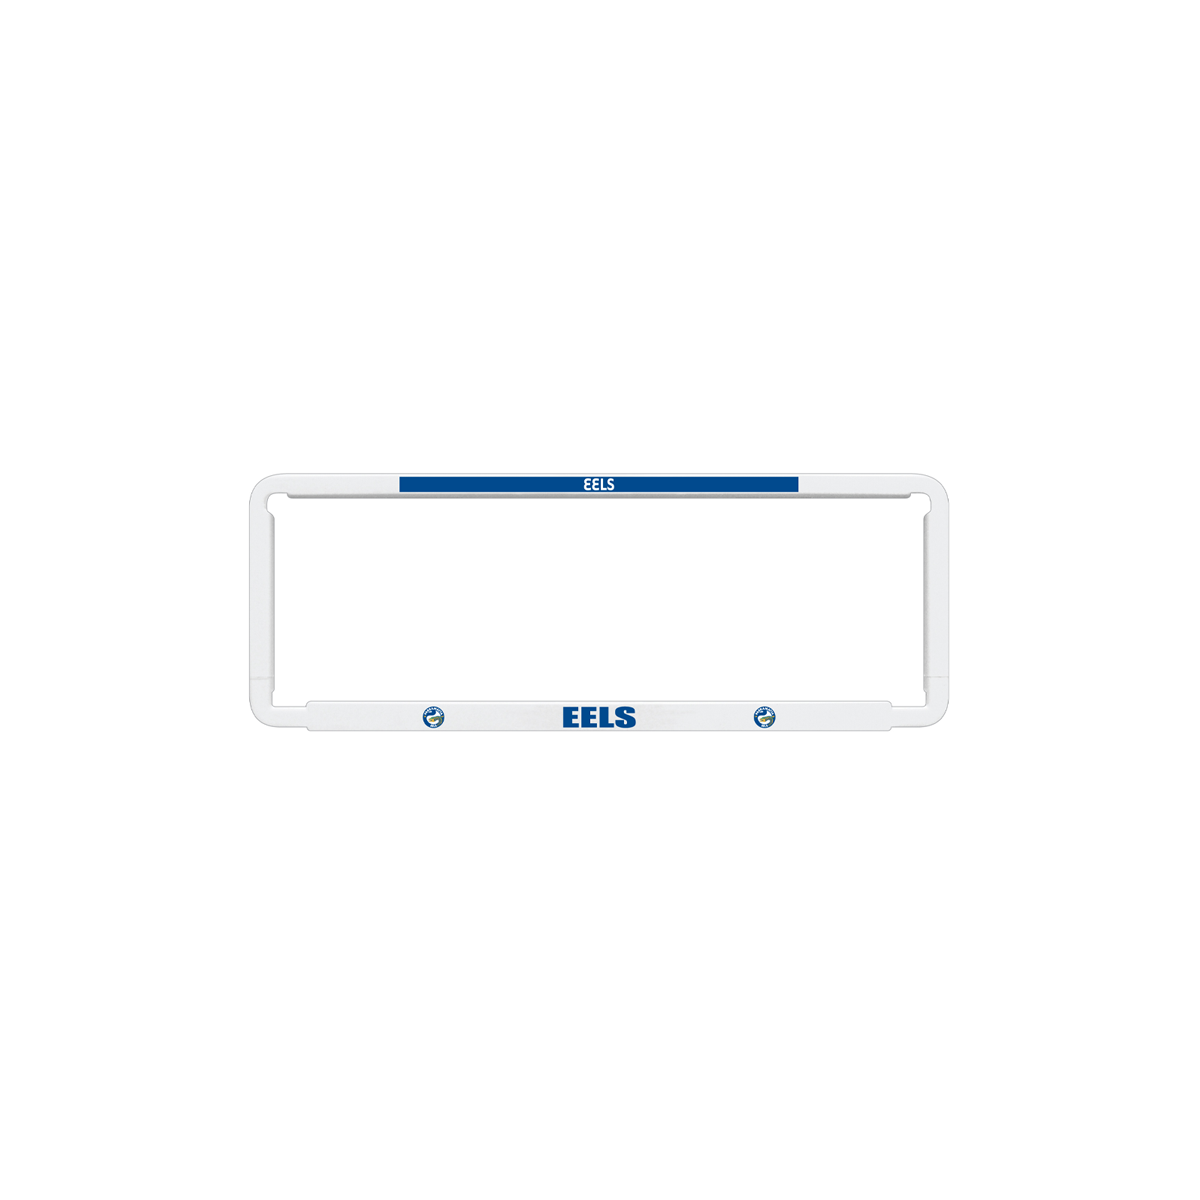 Parramatta Eels NRL Number Plate Cover